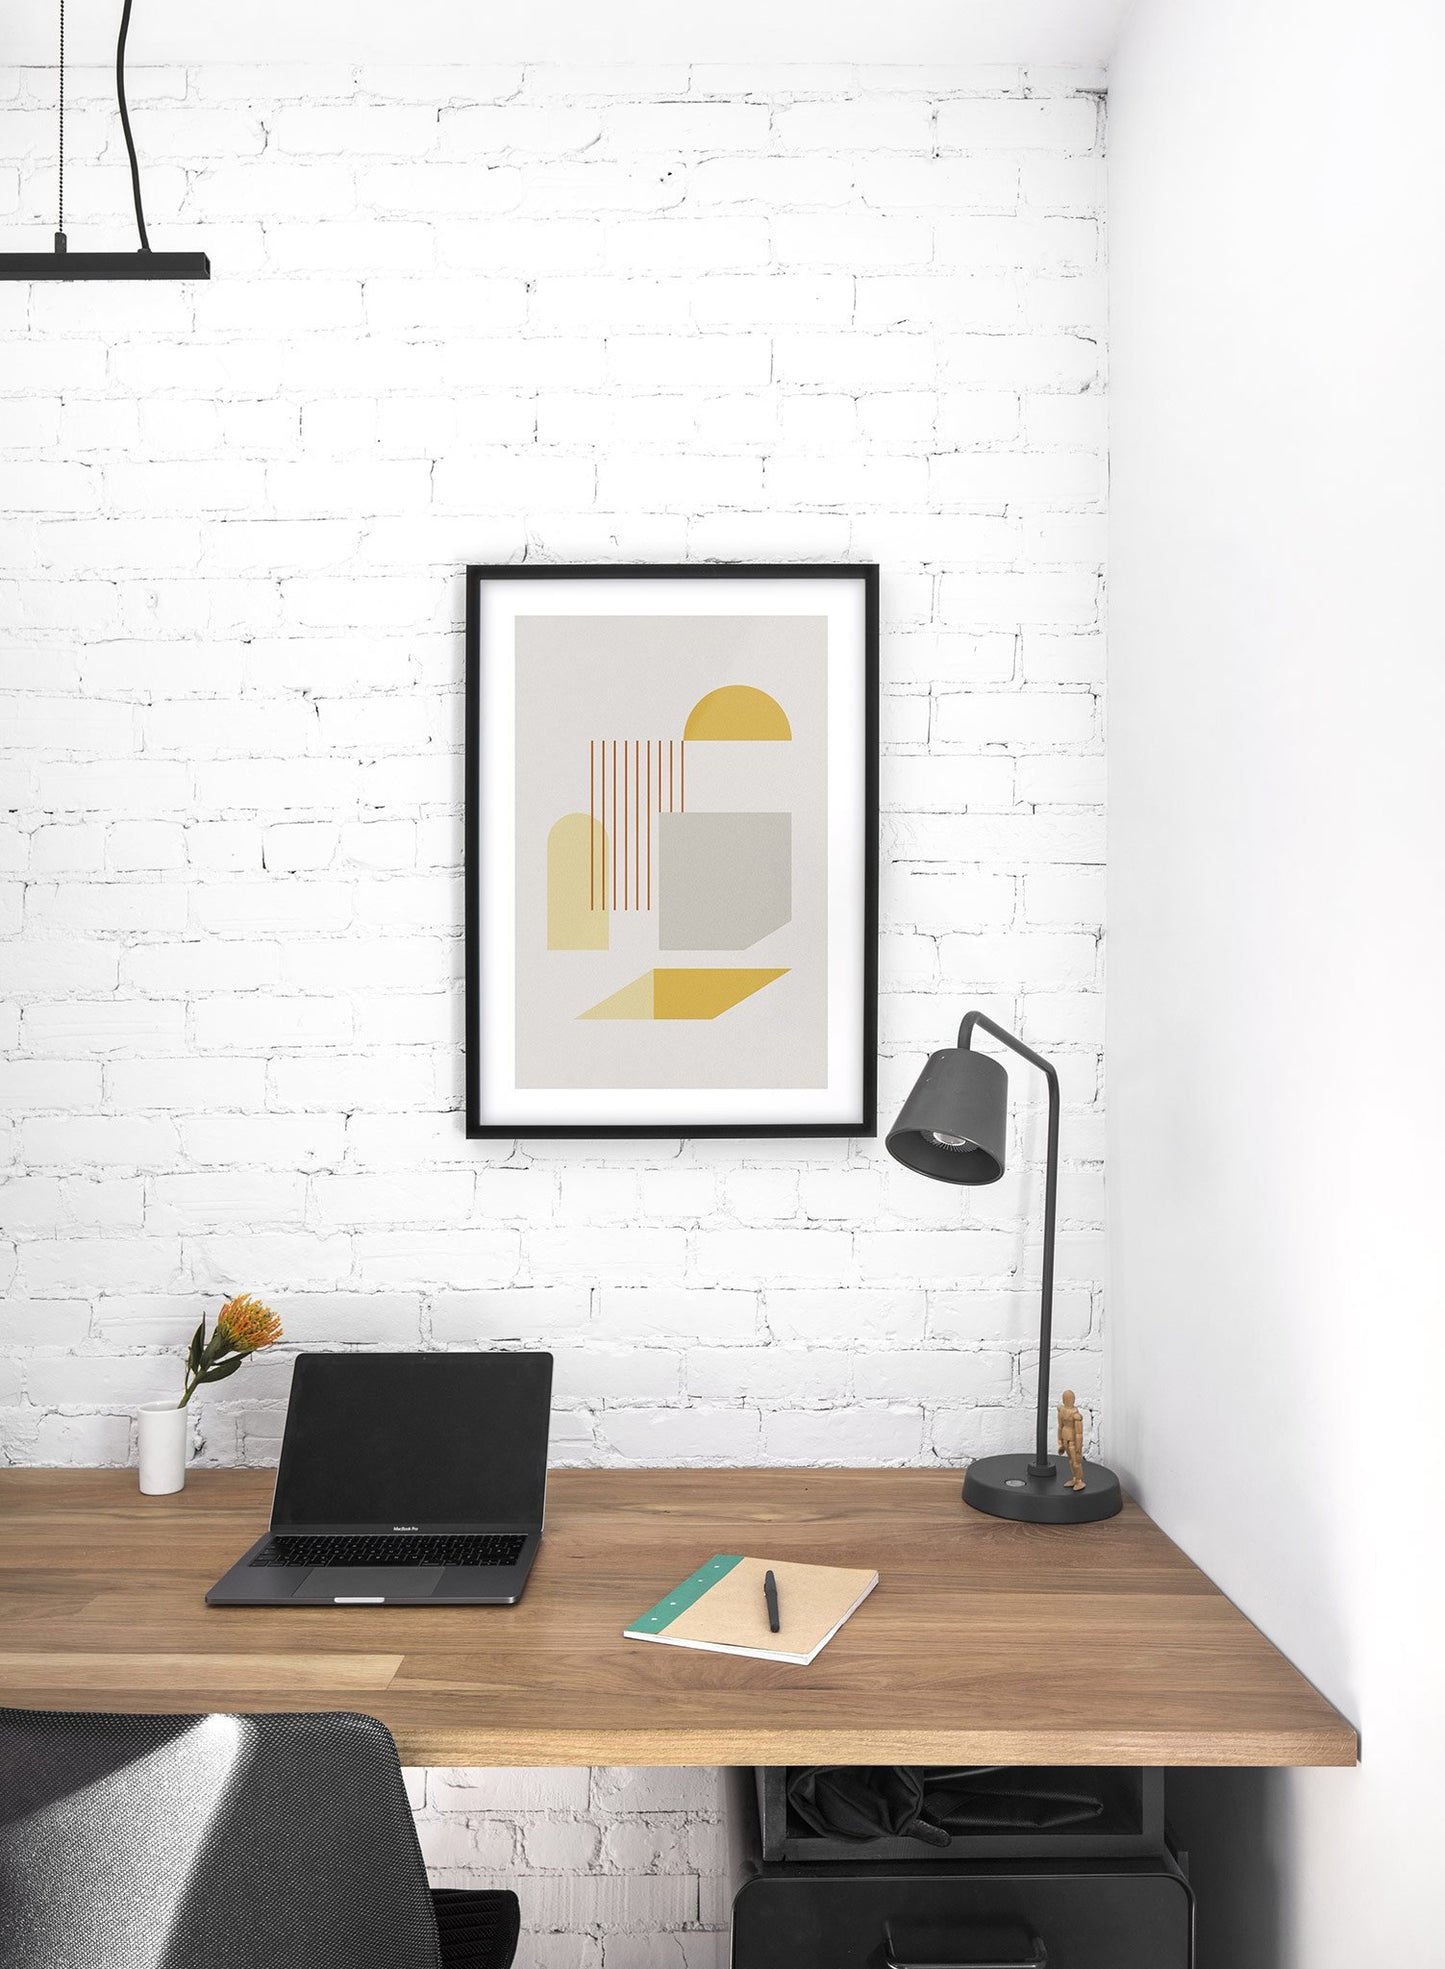 Minimalist design poster by Opposite Wall with Obstacle Course abstract graphic design - Lifestyle - Office Desk